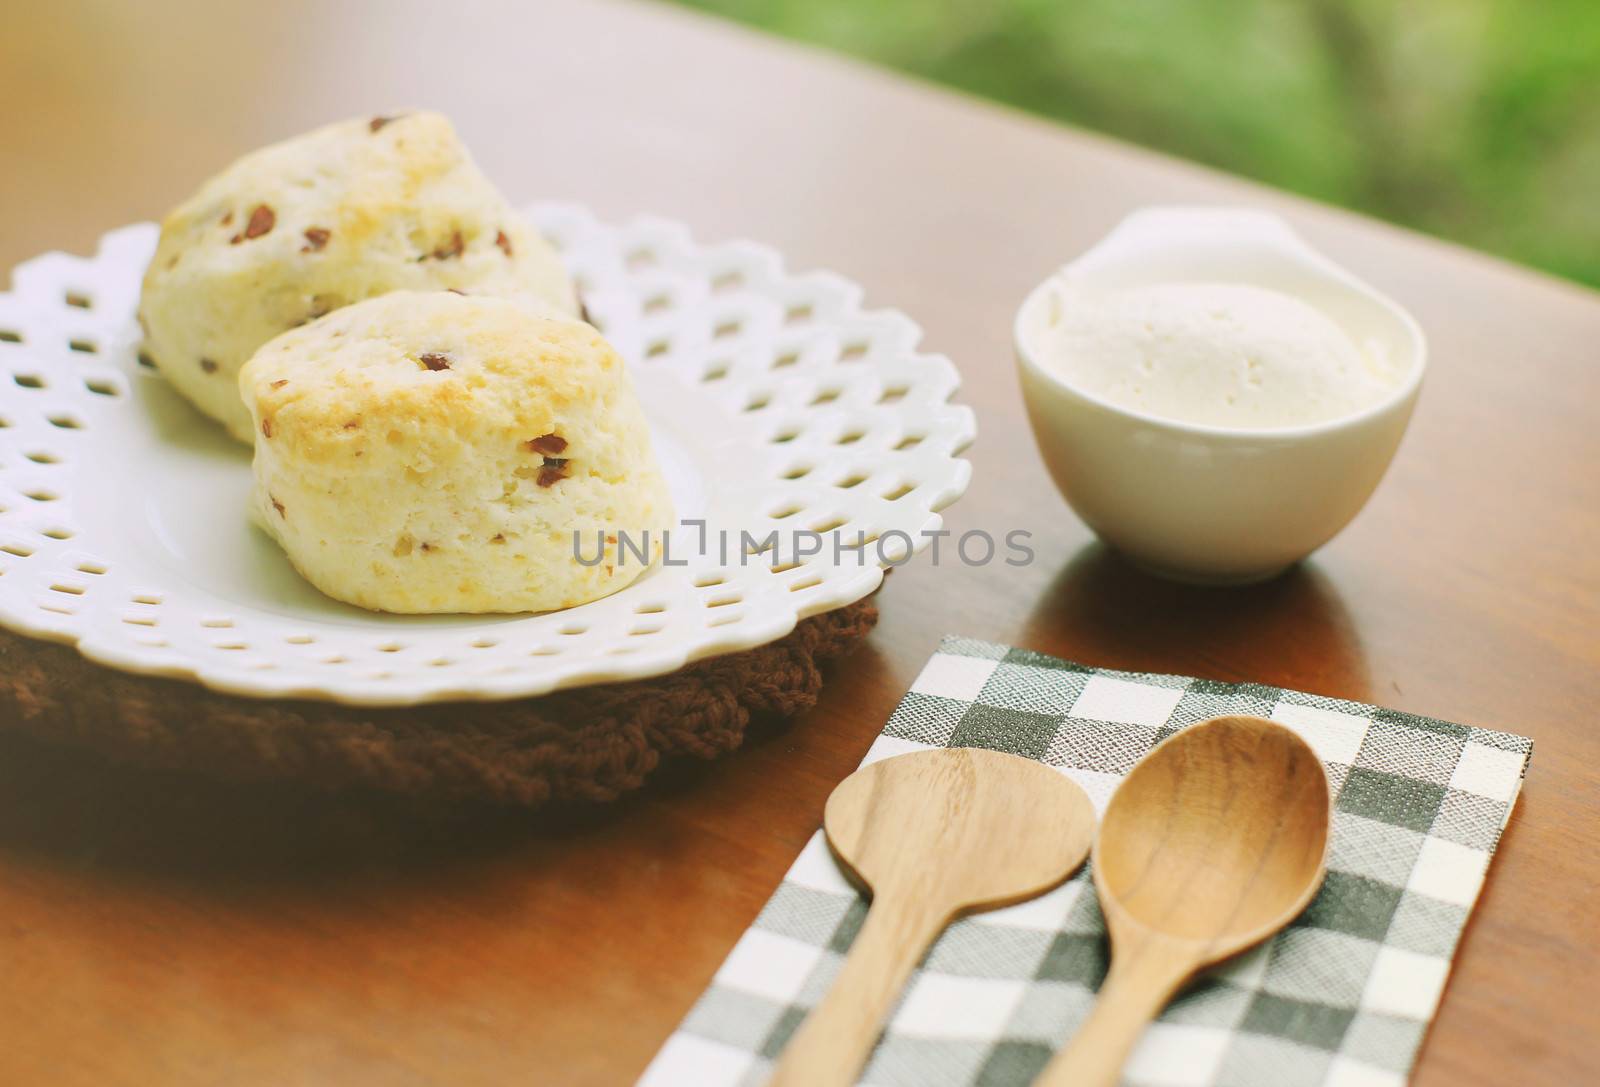 Homemade freshly baked scones with cream and wooden spoon, retro by nuchylee